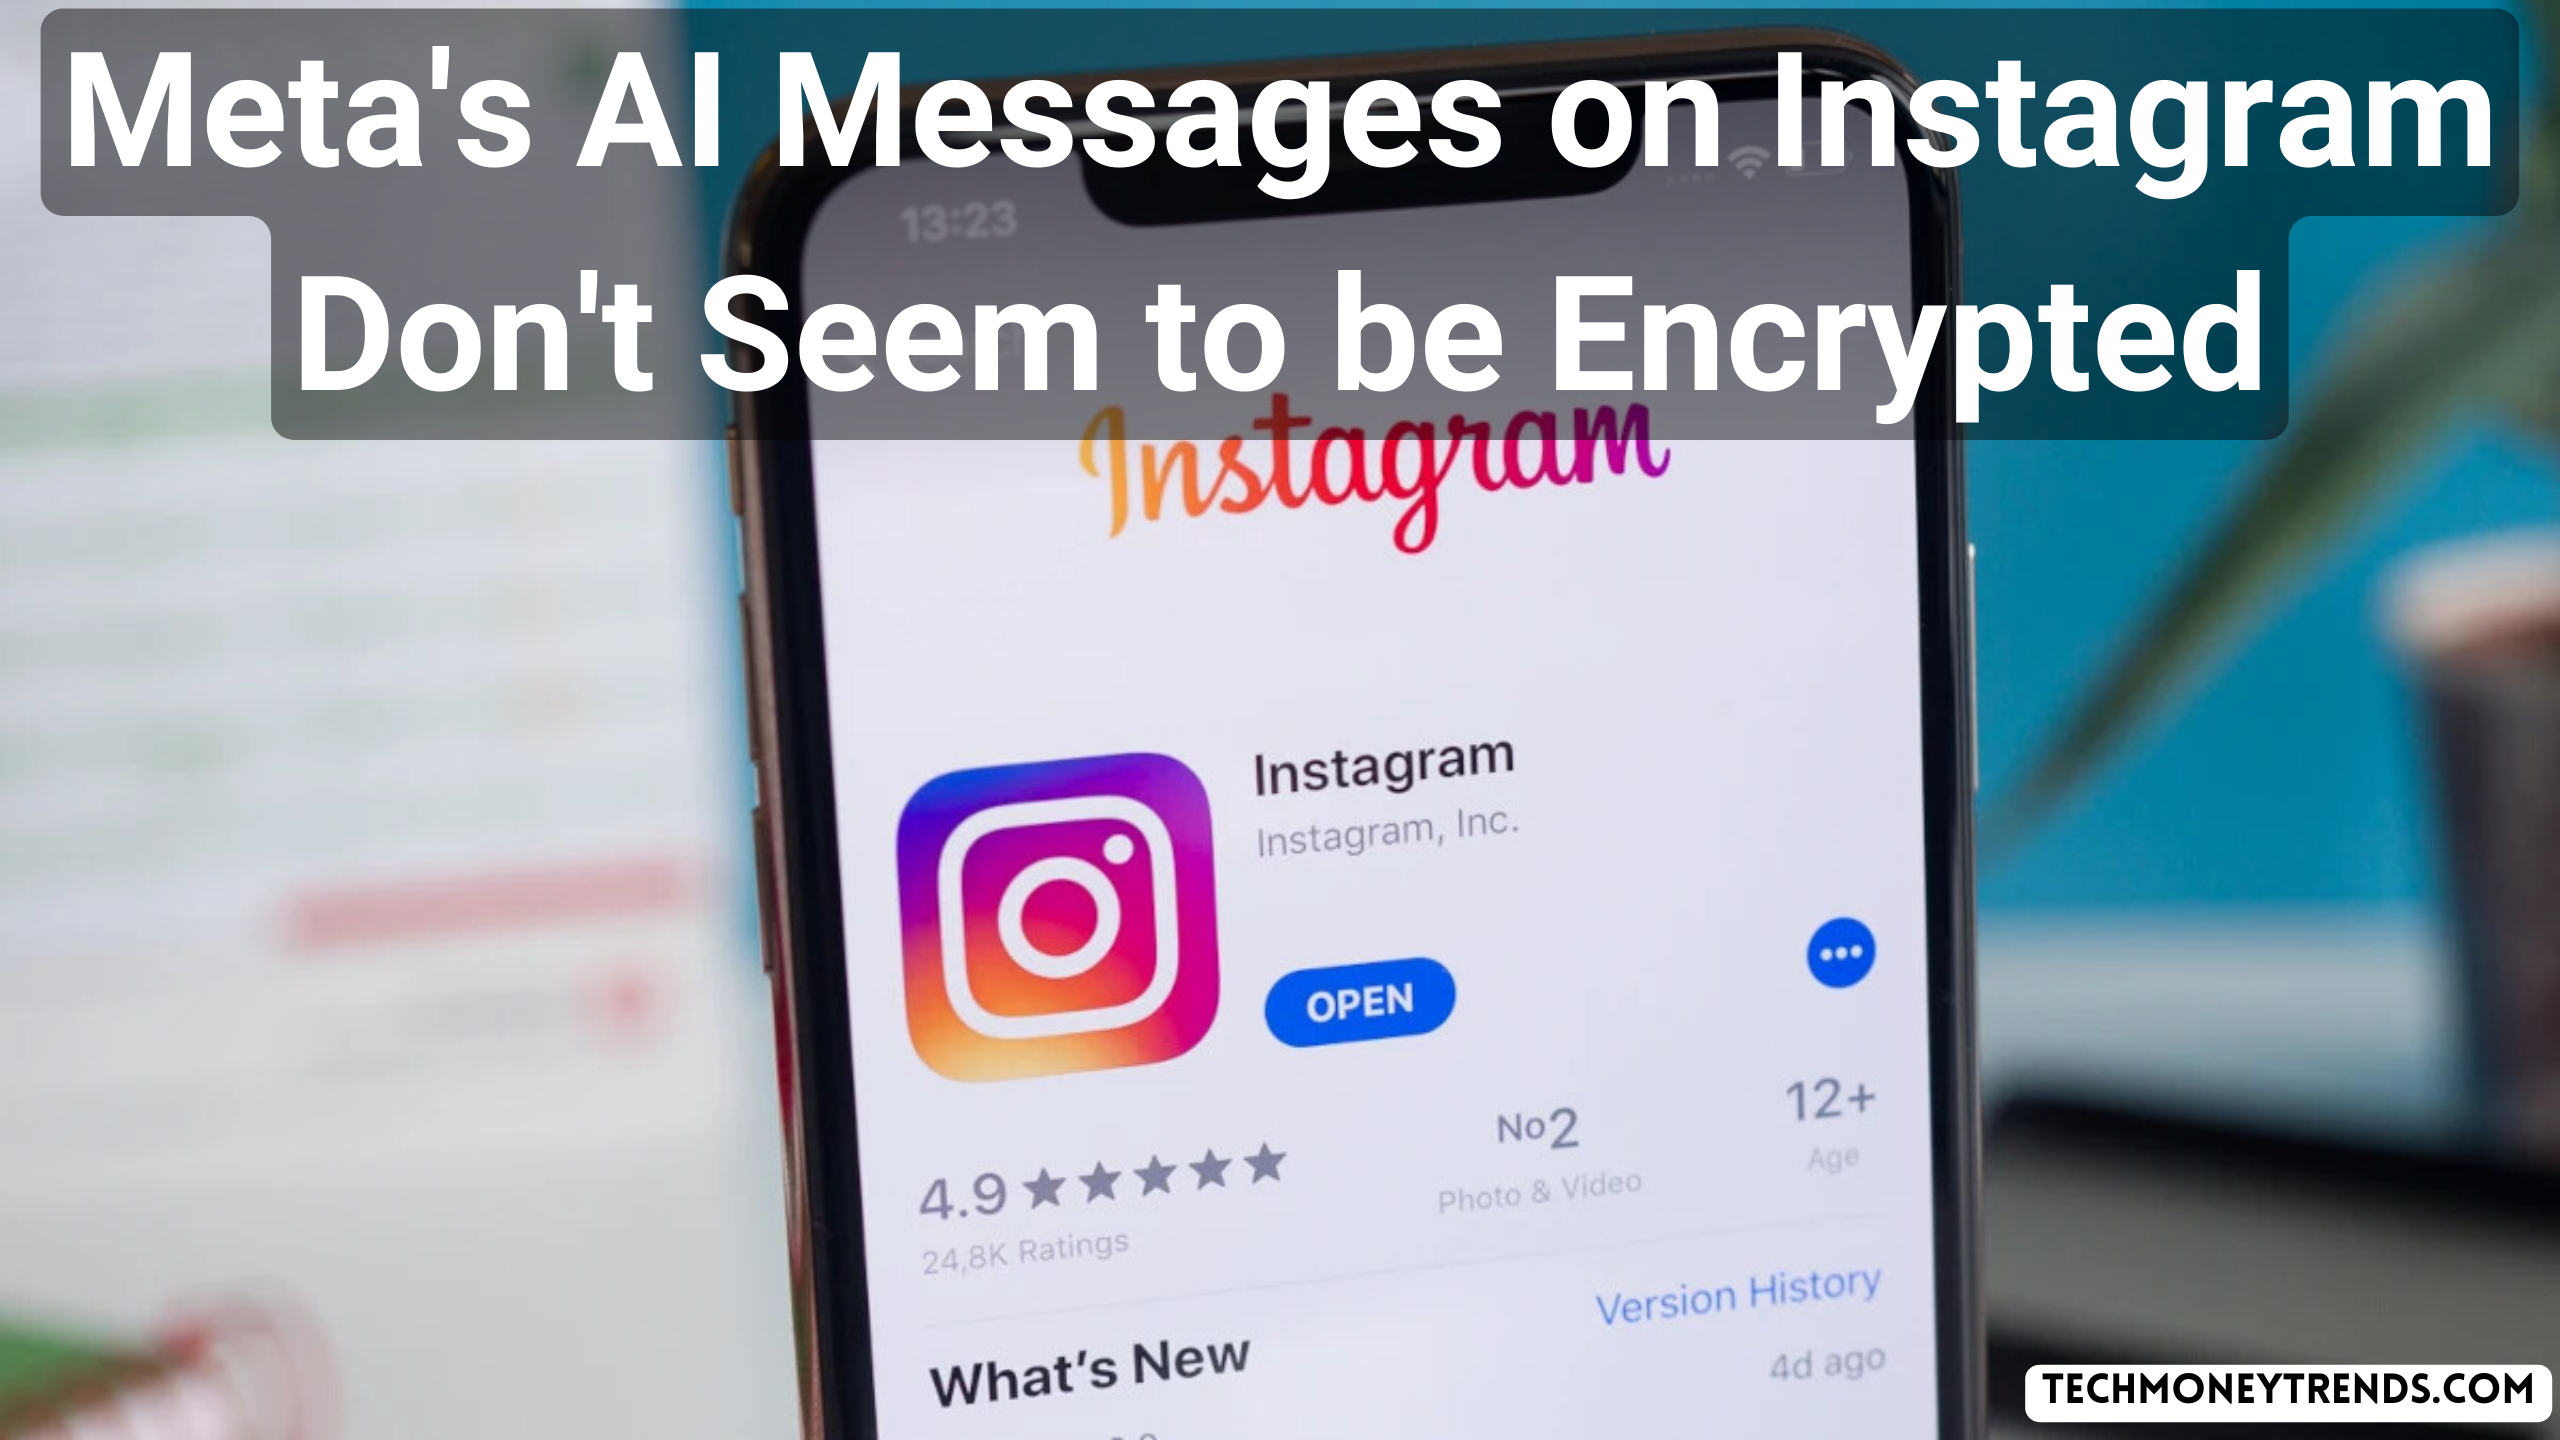 Meta's AI Messages on Instagram Don't Seem to be Encrypted